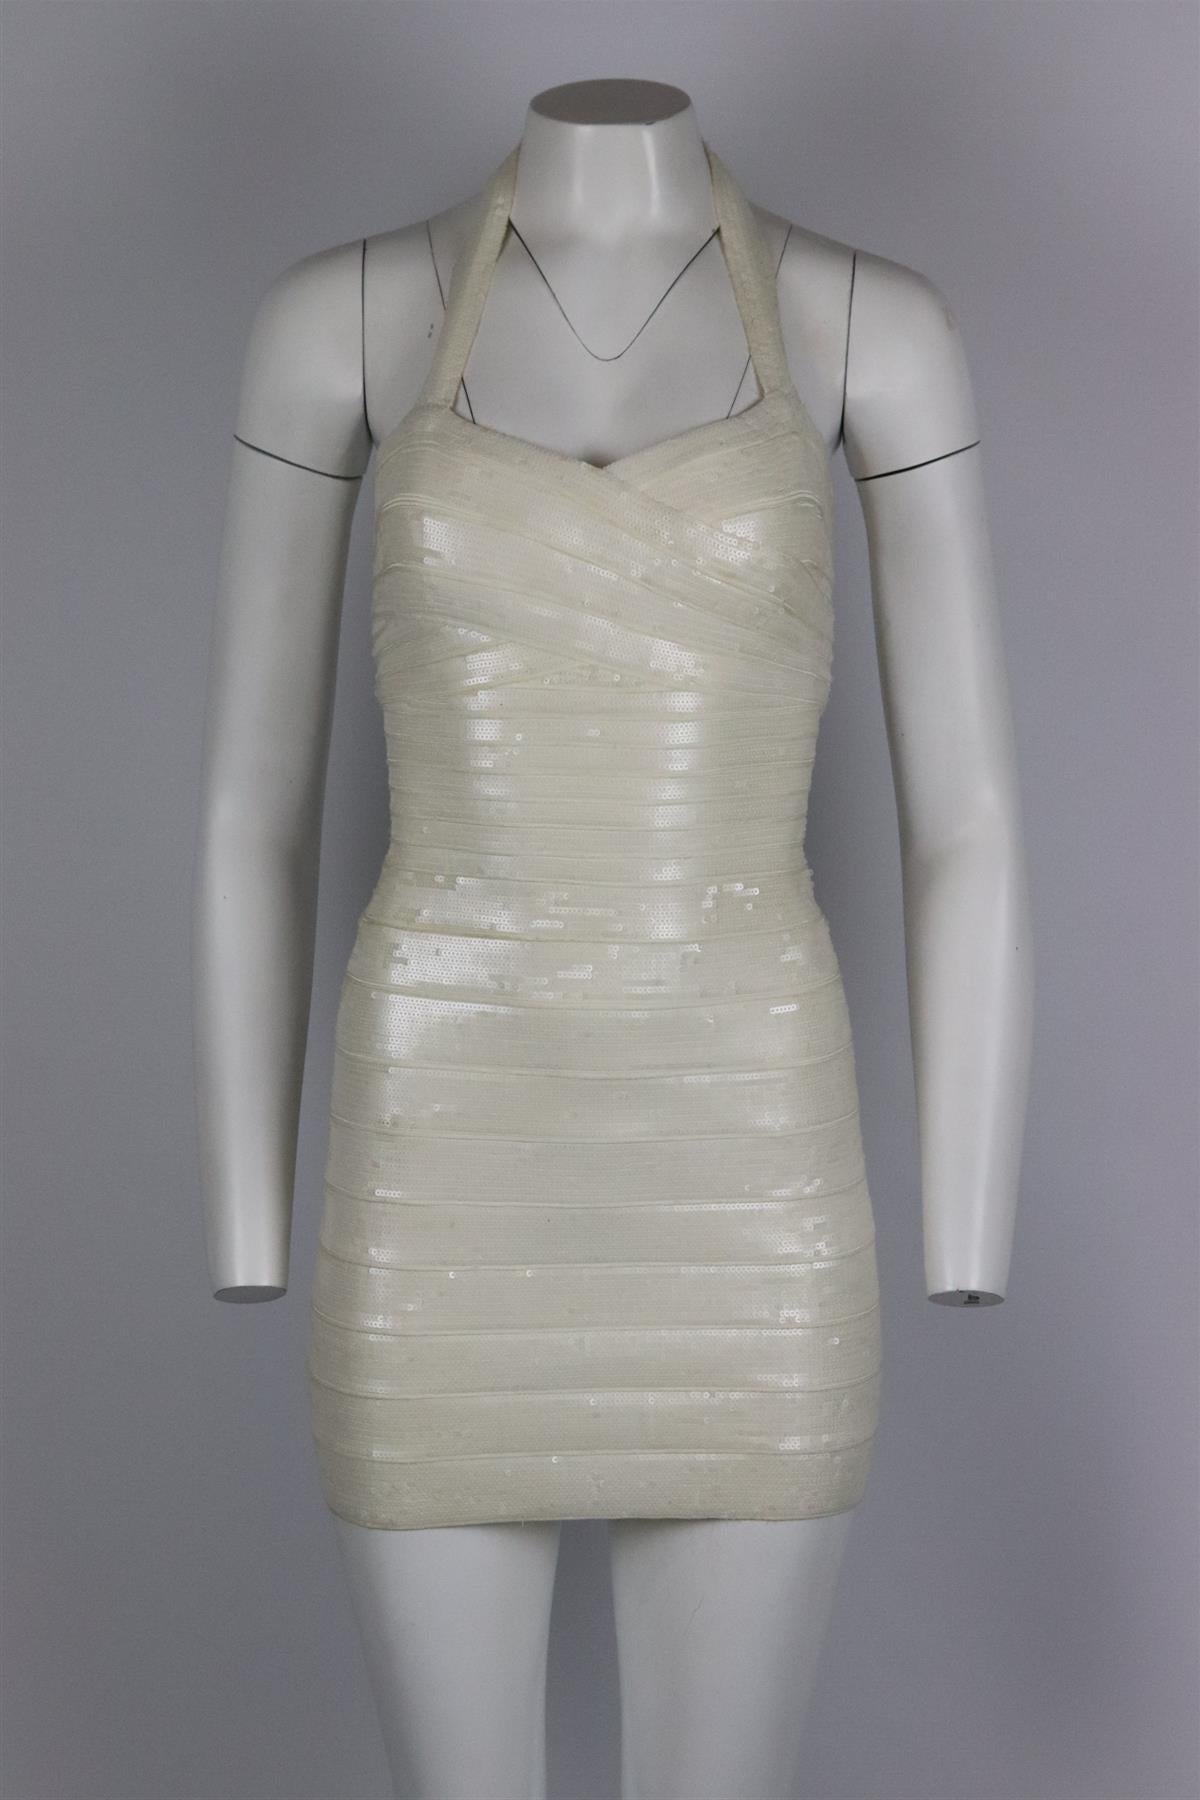 Herve Leger sequined bandage mini dress. Ivory. Sleeveless, halterneck. Zip fastening at back. 90% Rayon, 9% nylon, 1% spandex. Size: Small (UK 8, US 4, FR 36, IT 40) Bust: 32 in. Waist: 25 in. Hips: 34 in. Length: 28 in. Good condition - Some